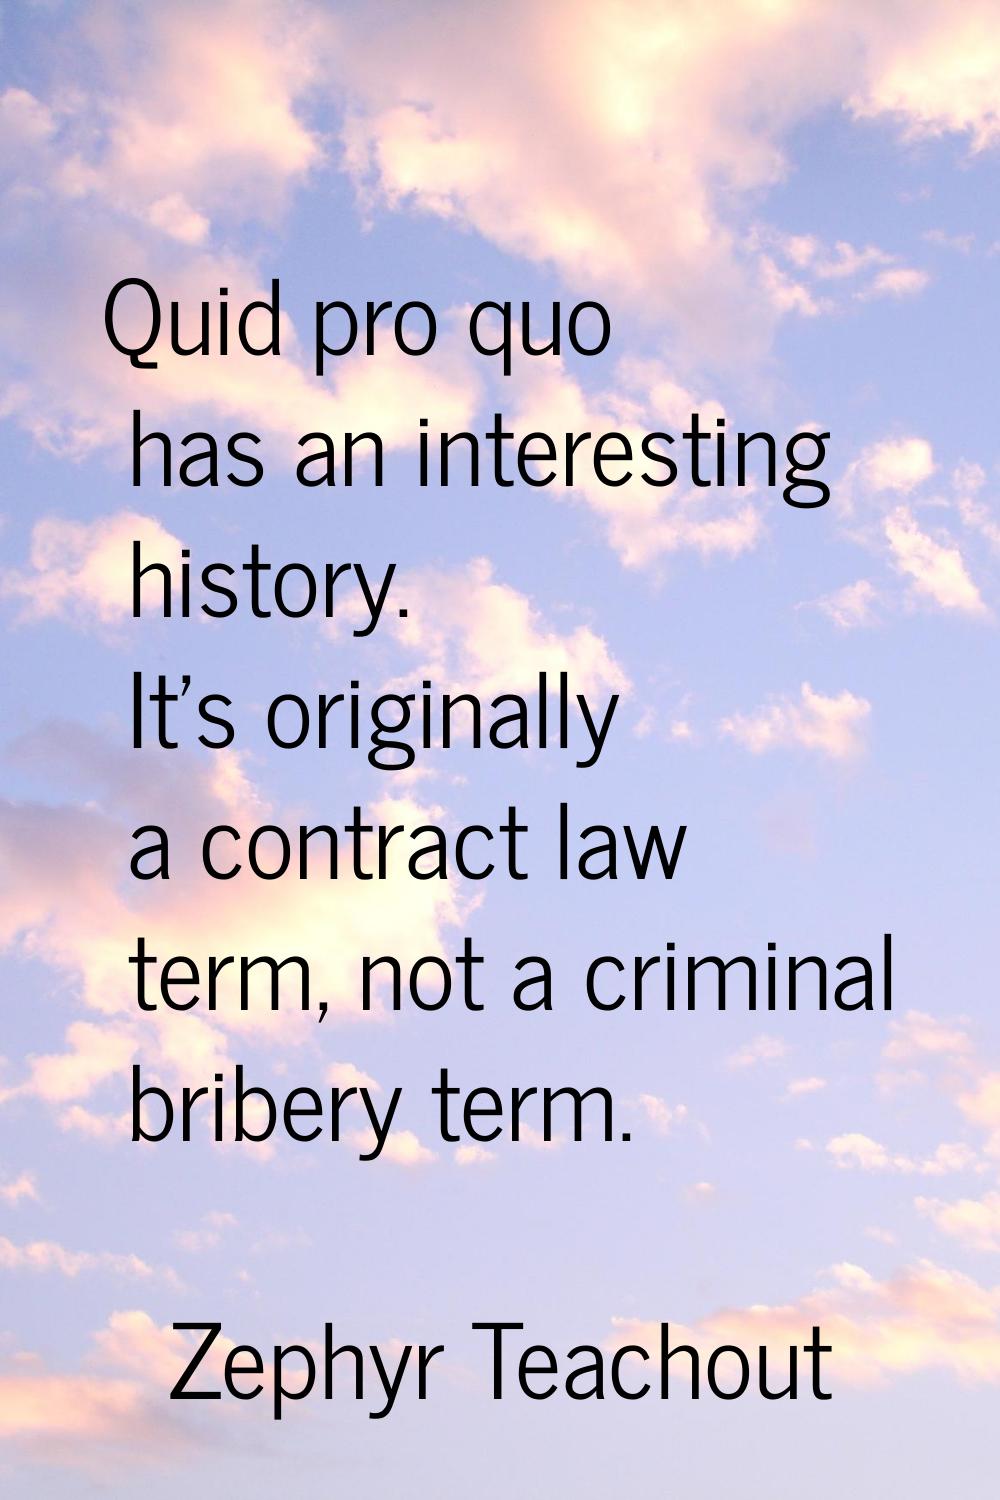 Quid pro quo has an interesting history. It's originally a contract law term, not a criminal briber